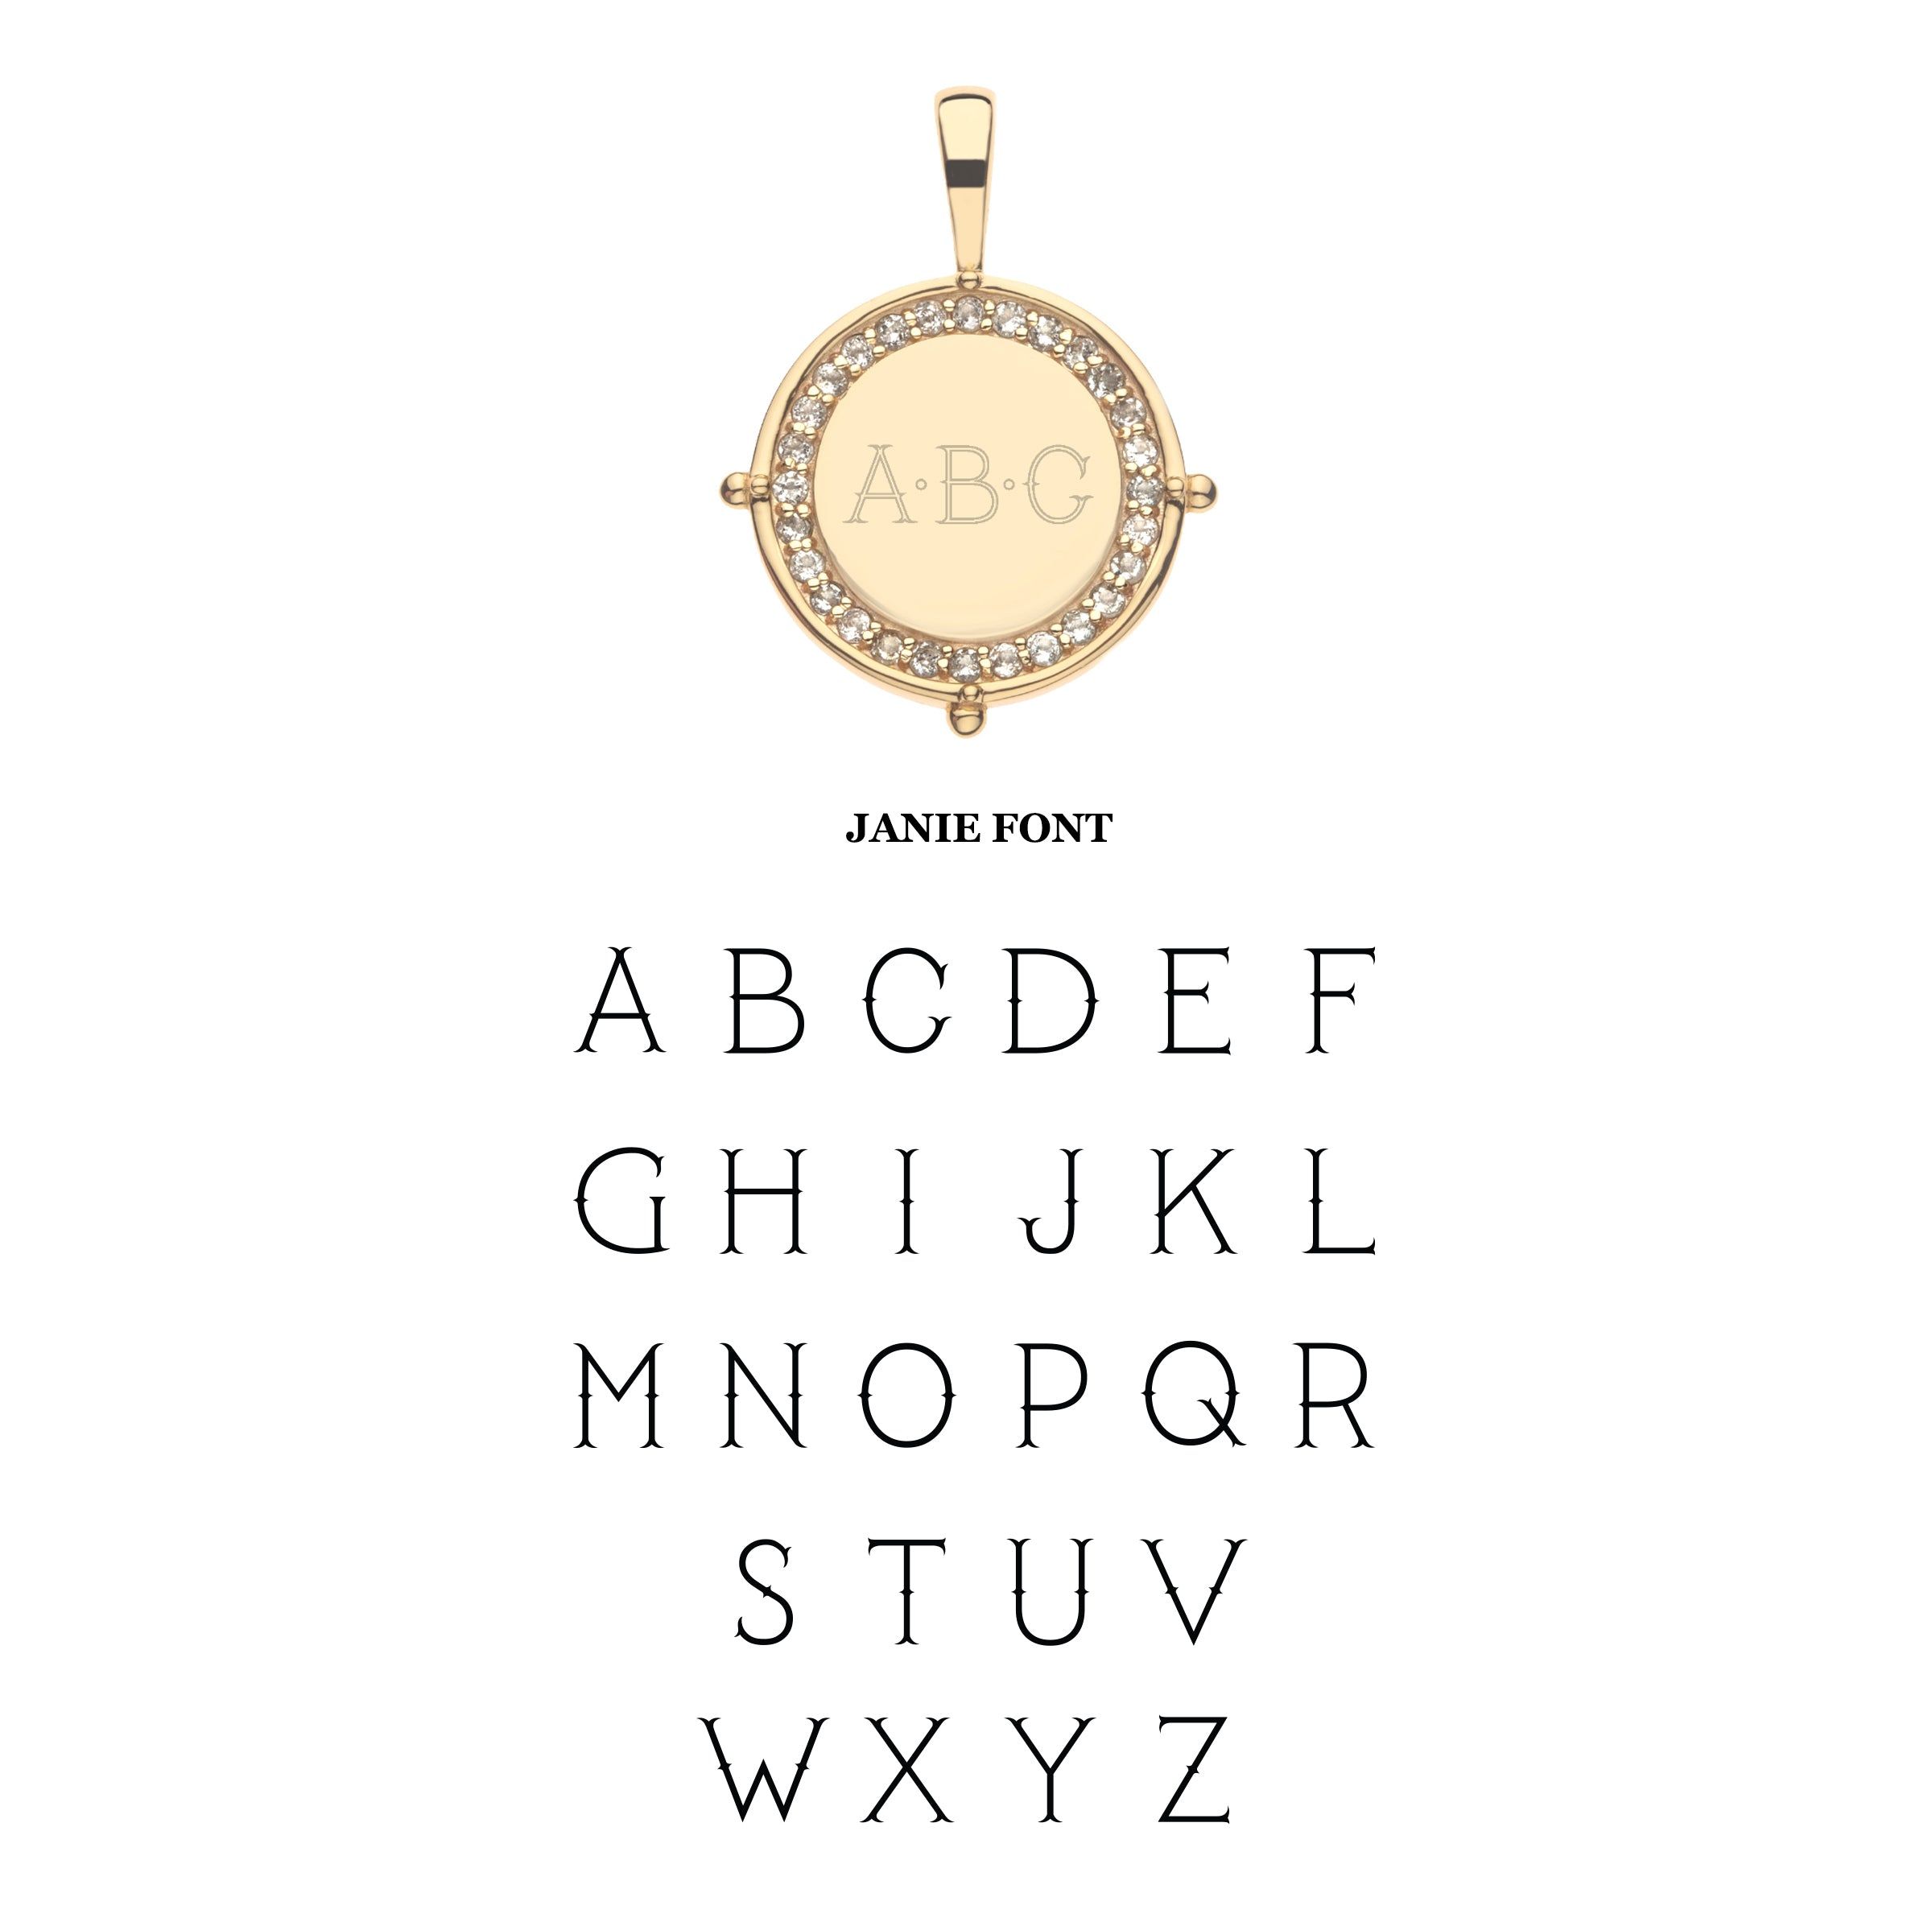 Embellished Personalized Petite Coin Pendant | Jane Win